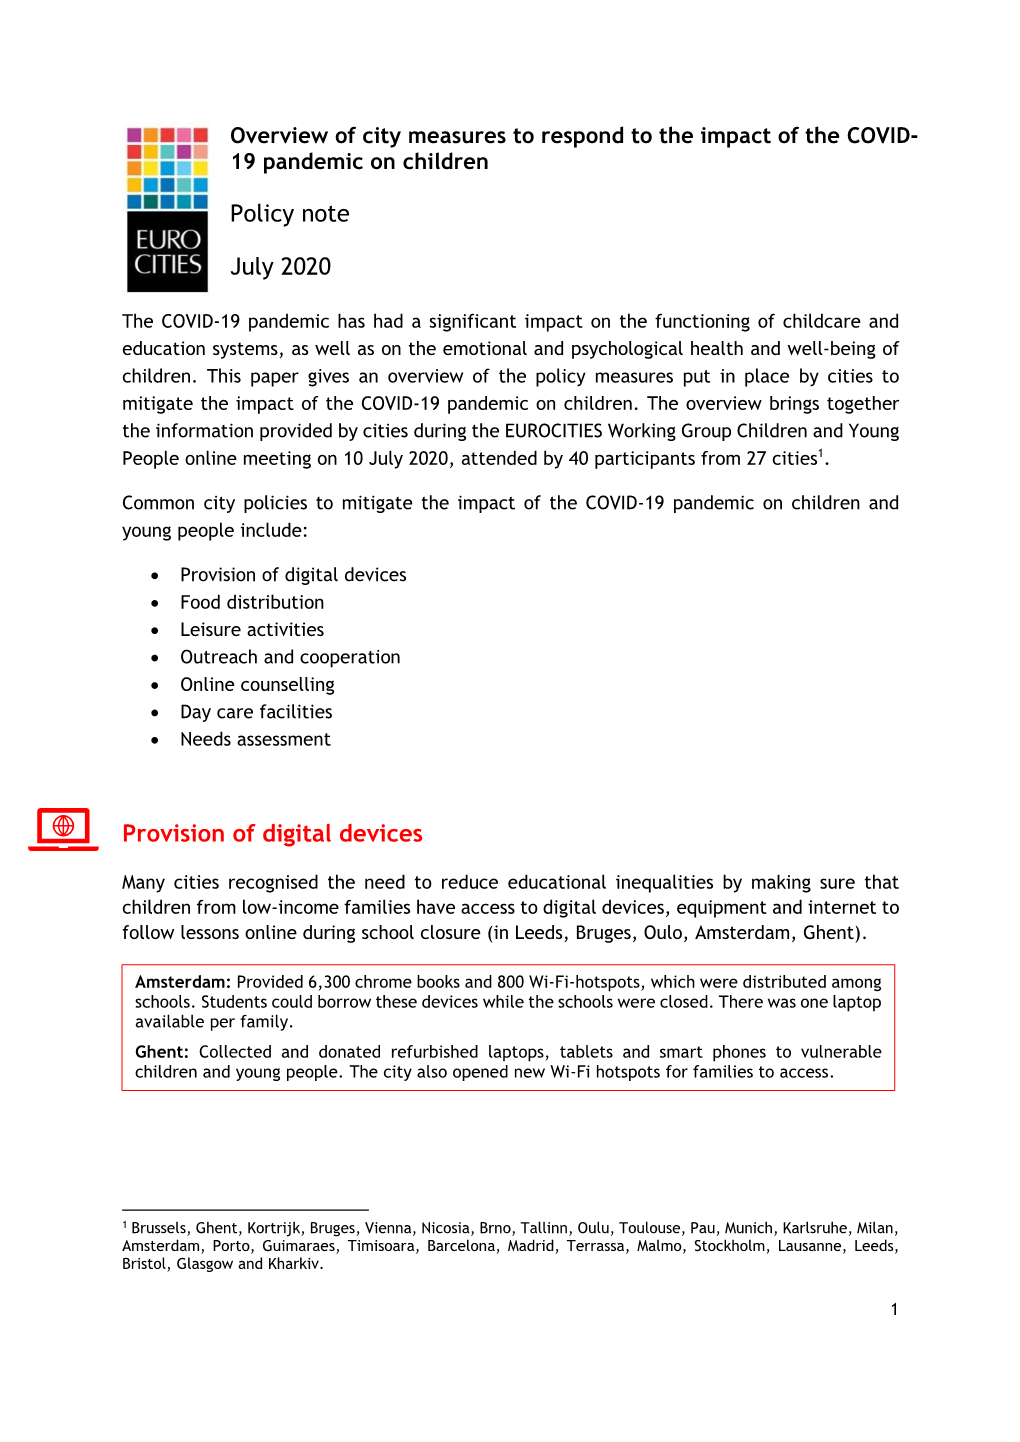 Policy Note July 2020 Provision of Digital Devices